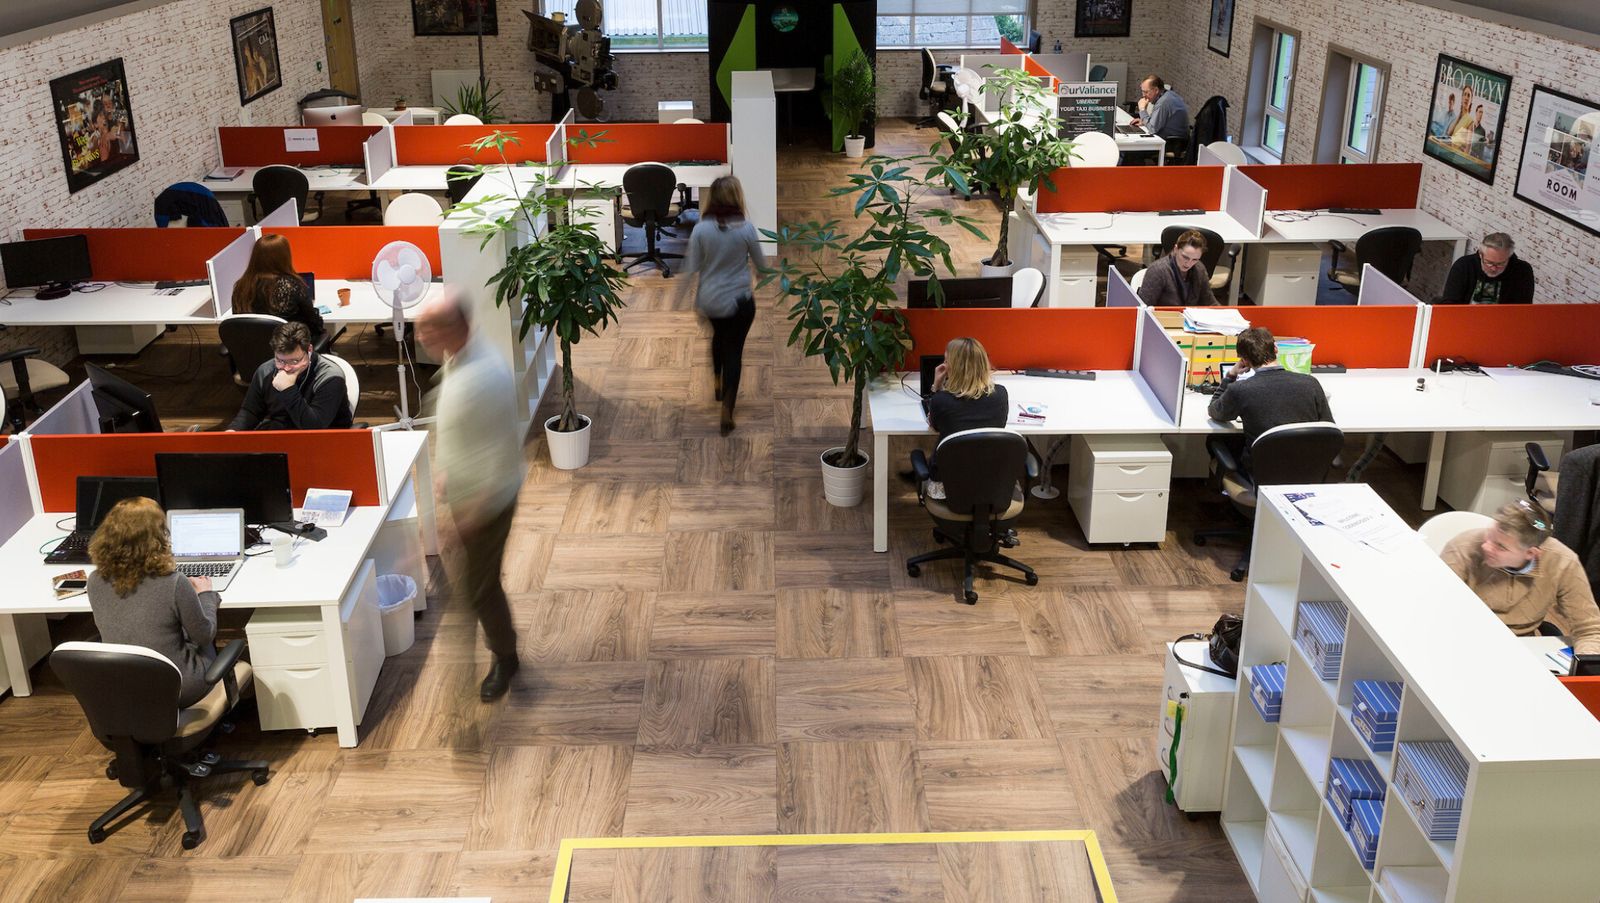 How Digital Hubs Could Replace Working From Home And The Office